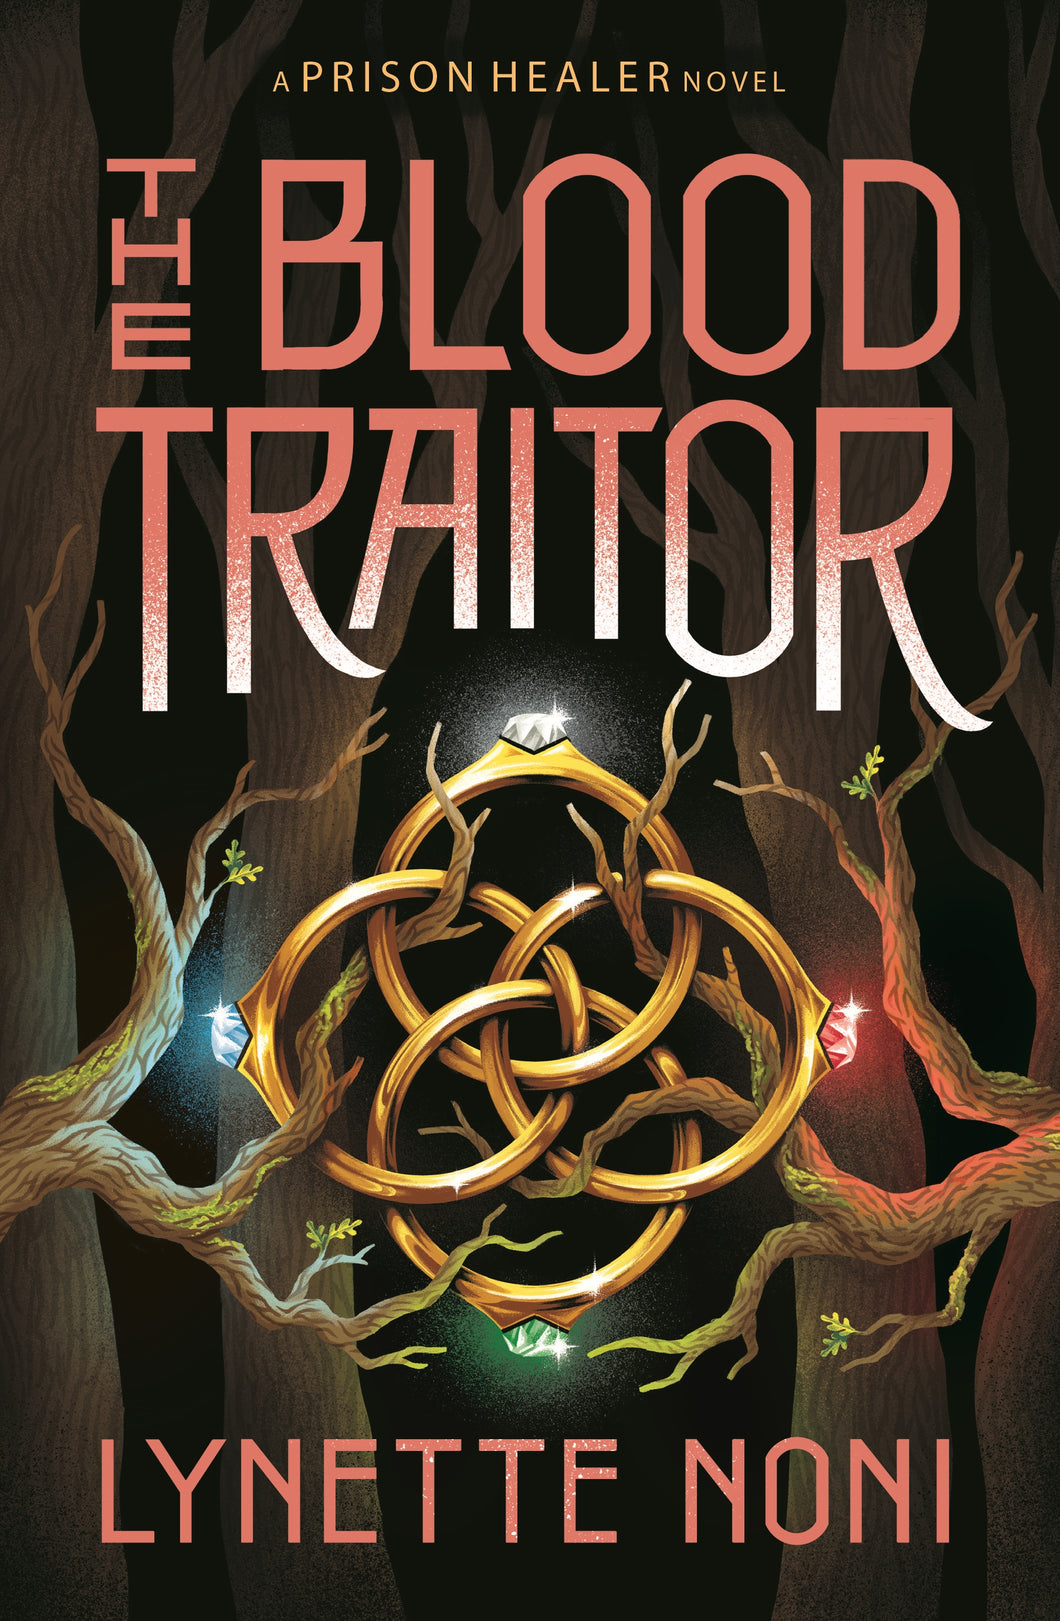 The Blood Traitor (The Prison Healer #3) by Lynette Noni